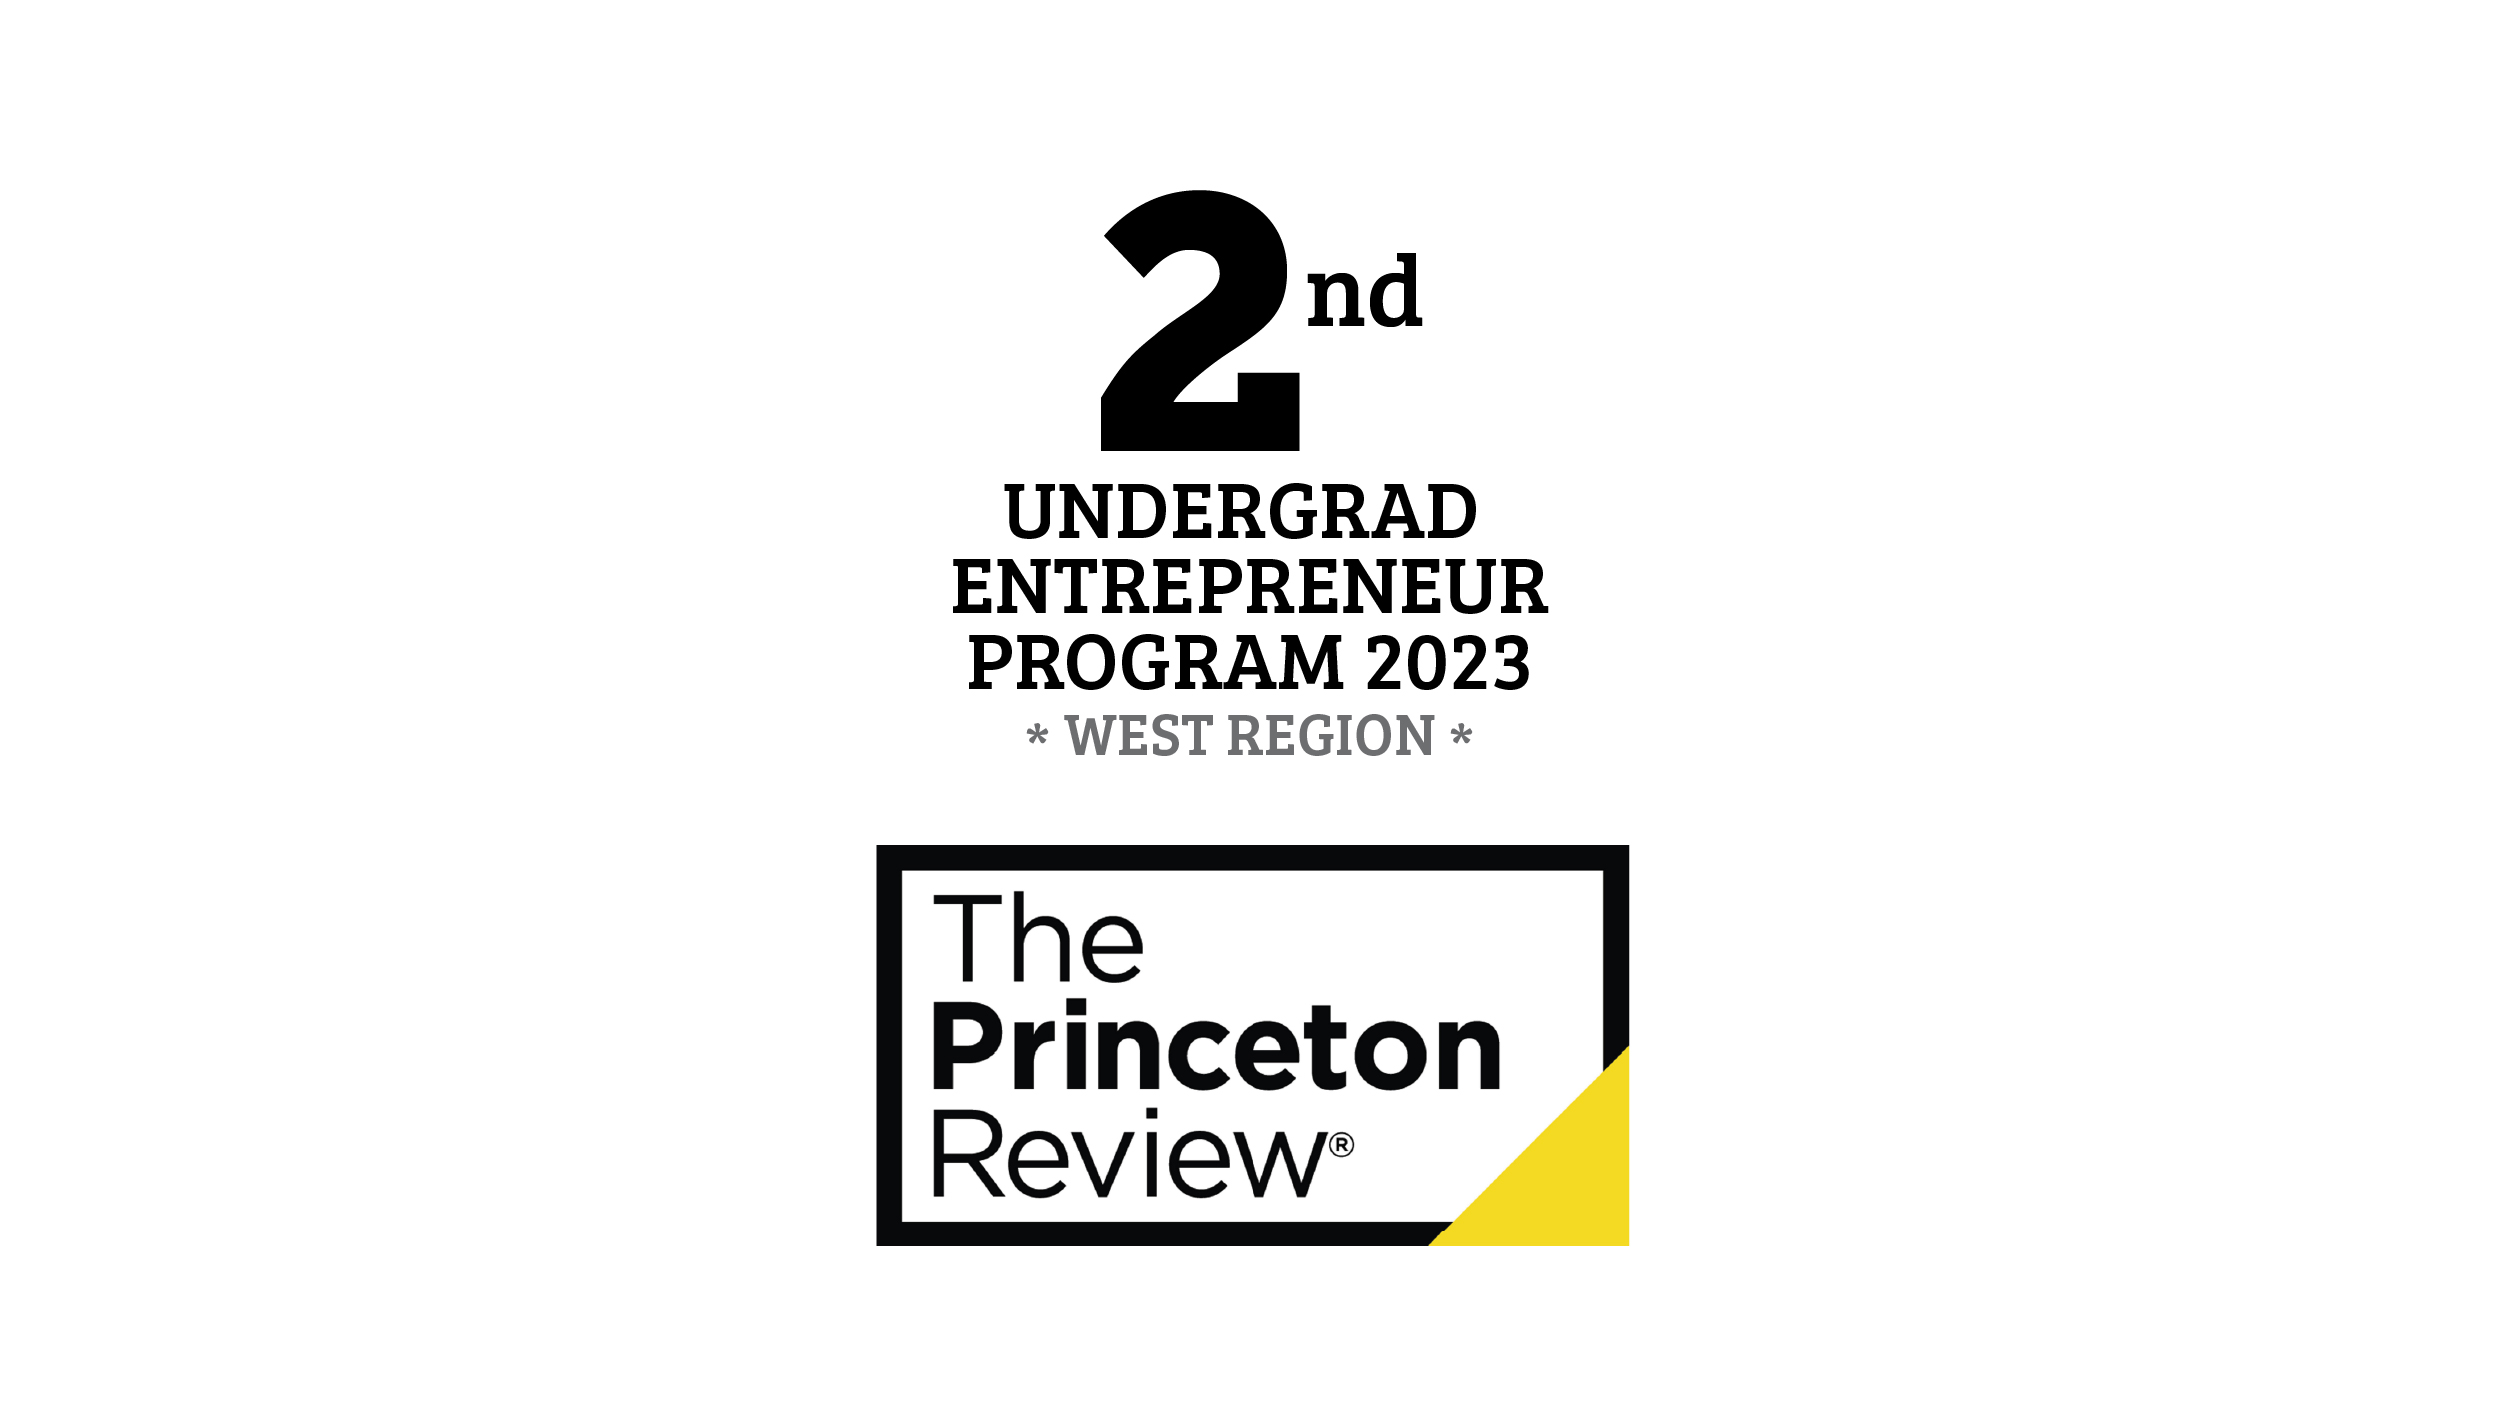 u-of-utah-ranked-no-2-for-entrepreneurship-in-the-west-by-princeton